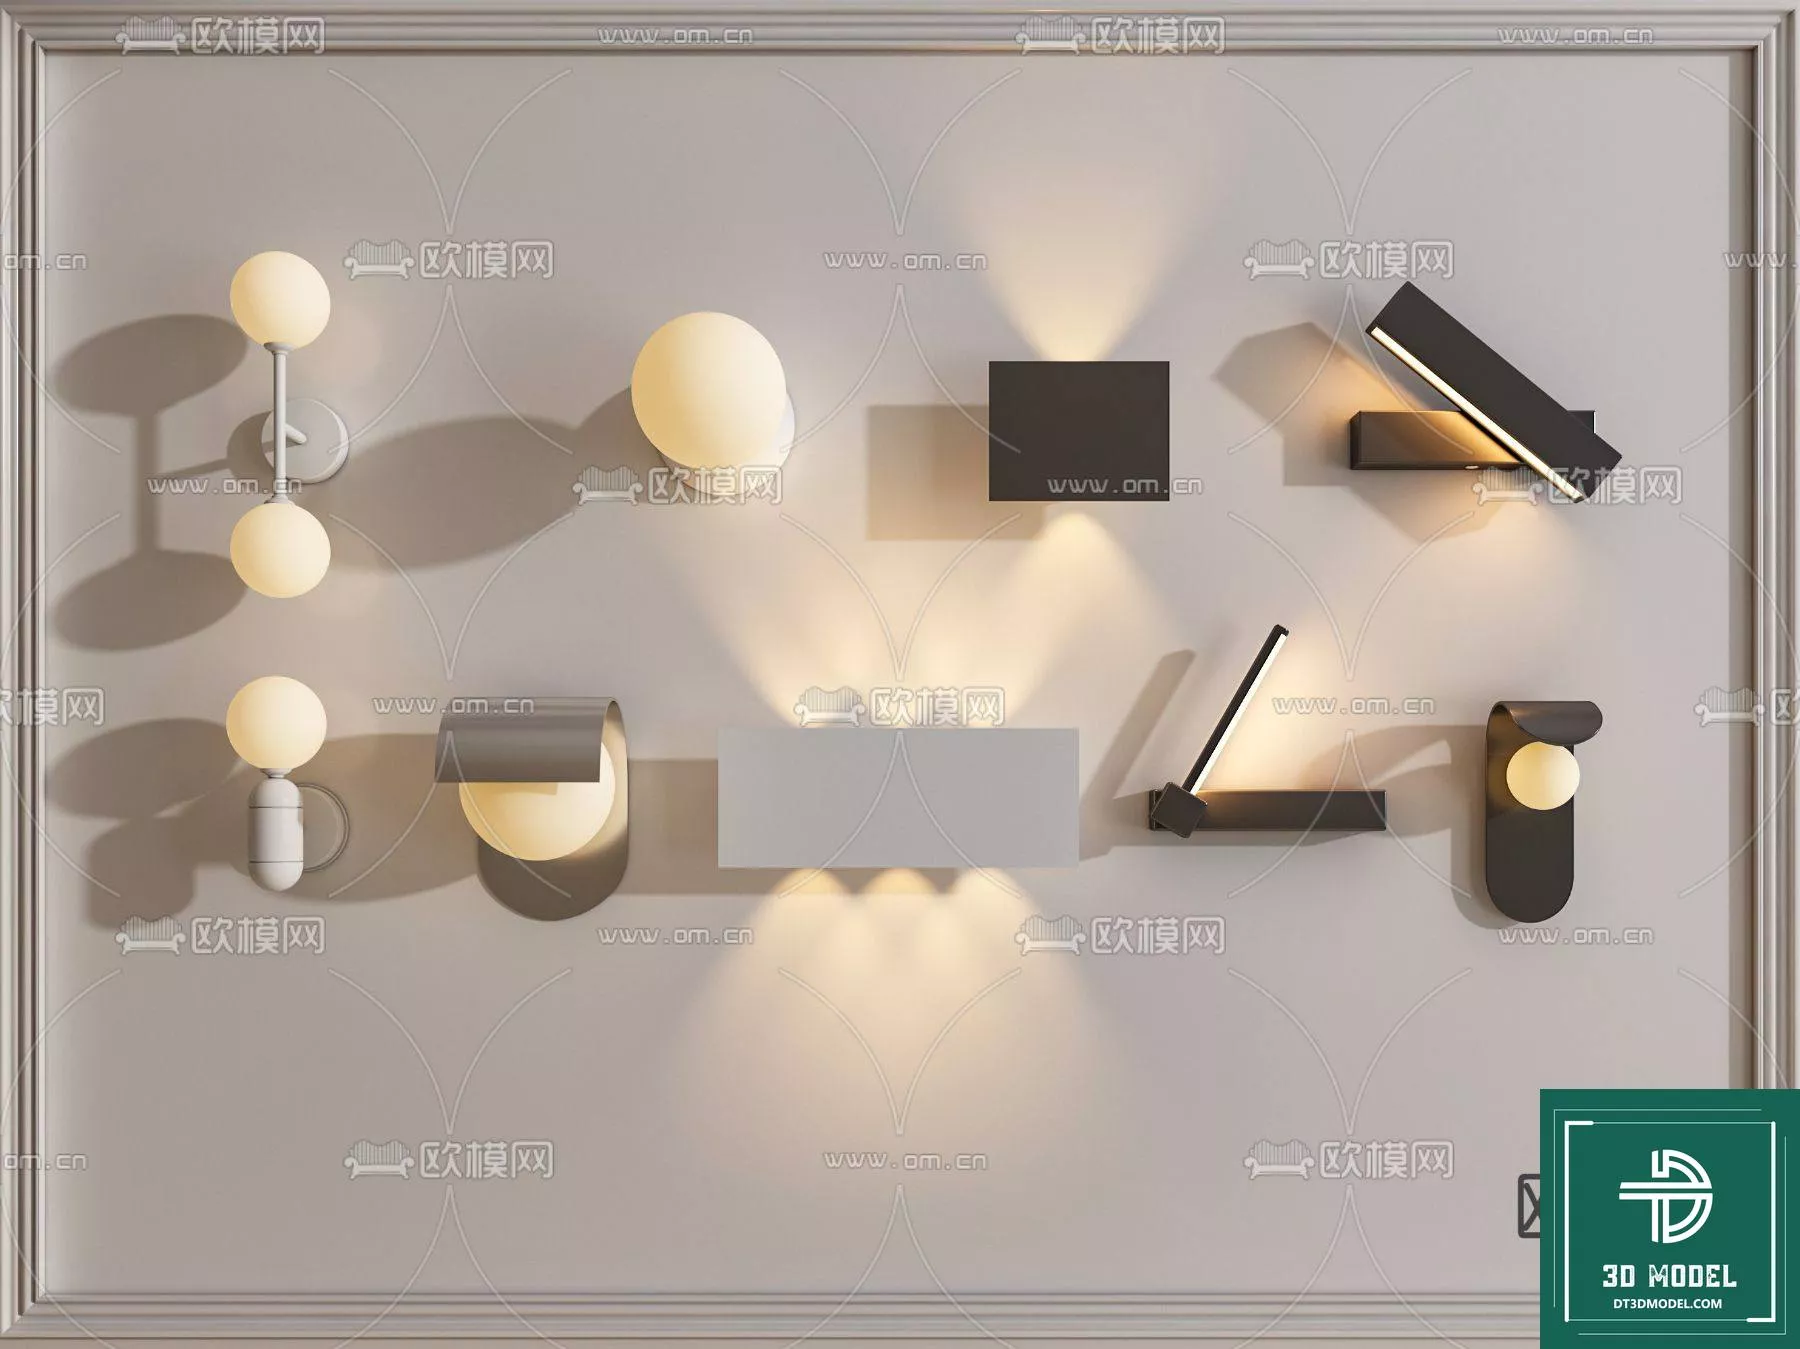 MODERN WALL LAMP - SKETCHUP 3D MODEL - VRAY OR ENSCAPE - ID16095